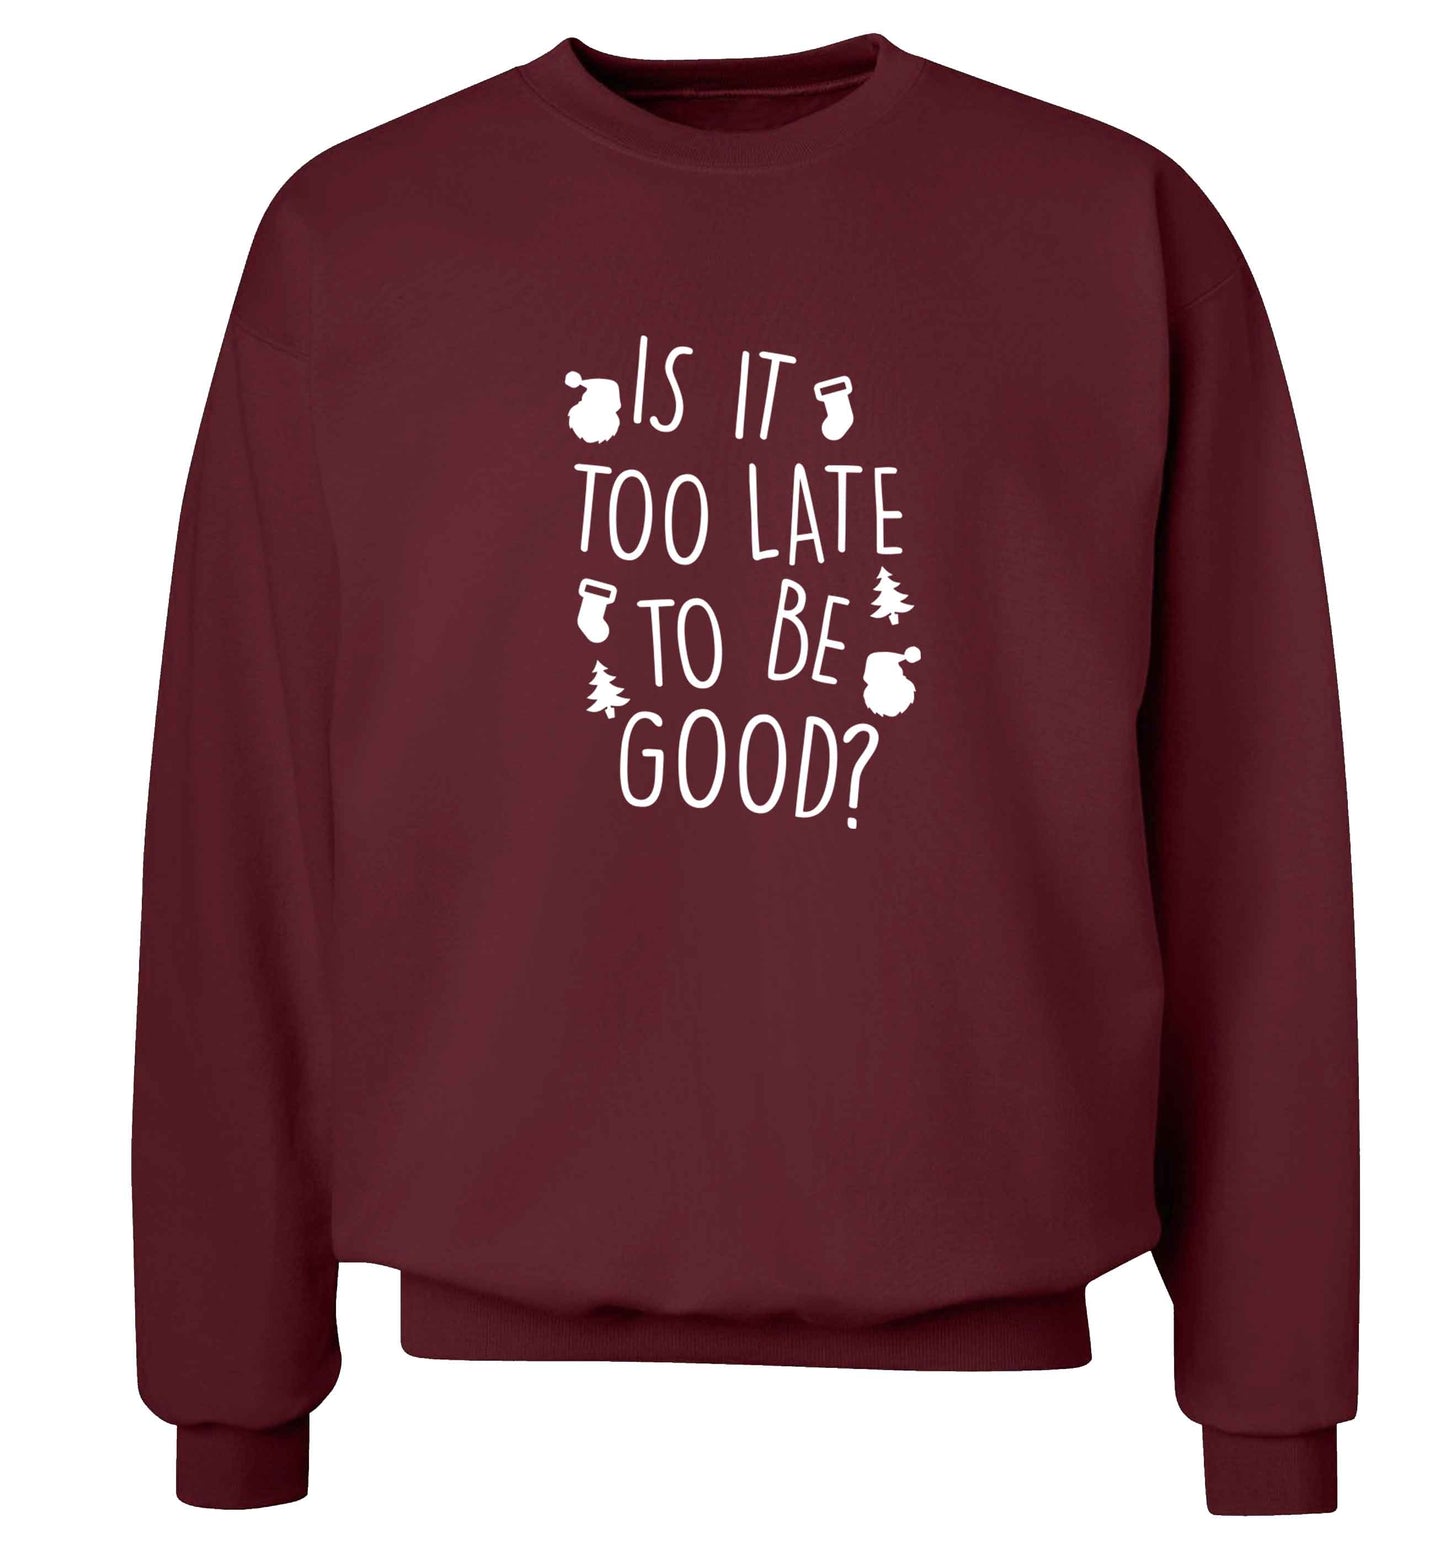 Too Late to be Good adult's unisex maroon sweater 2XL